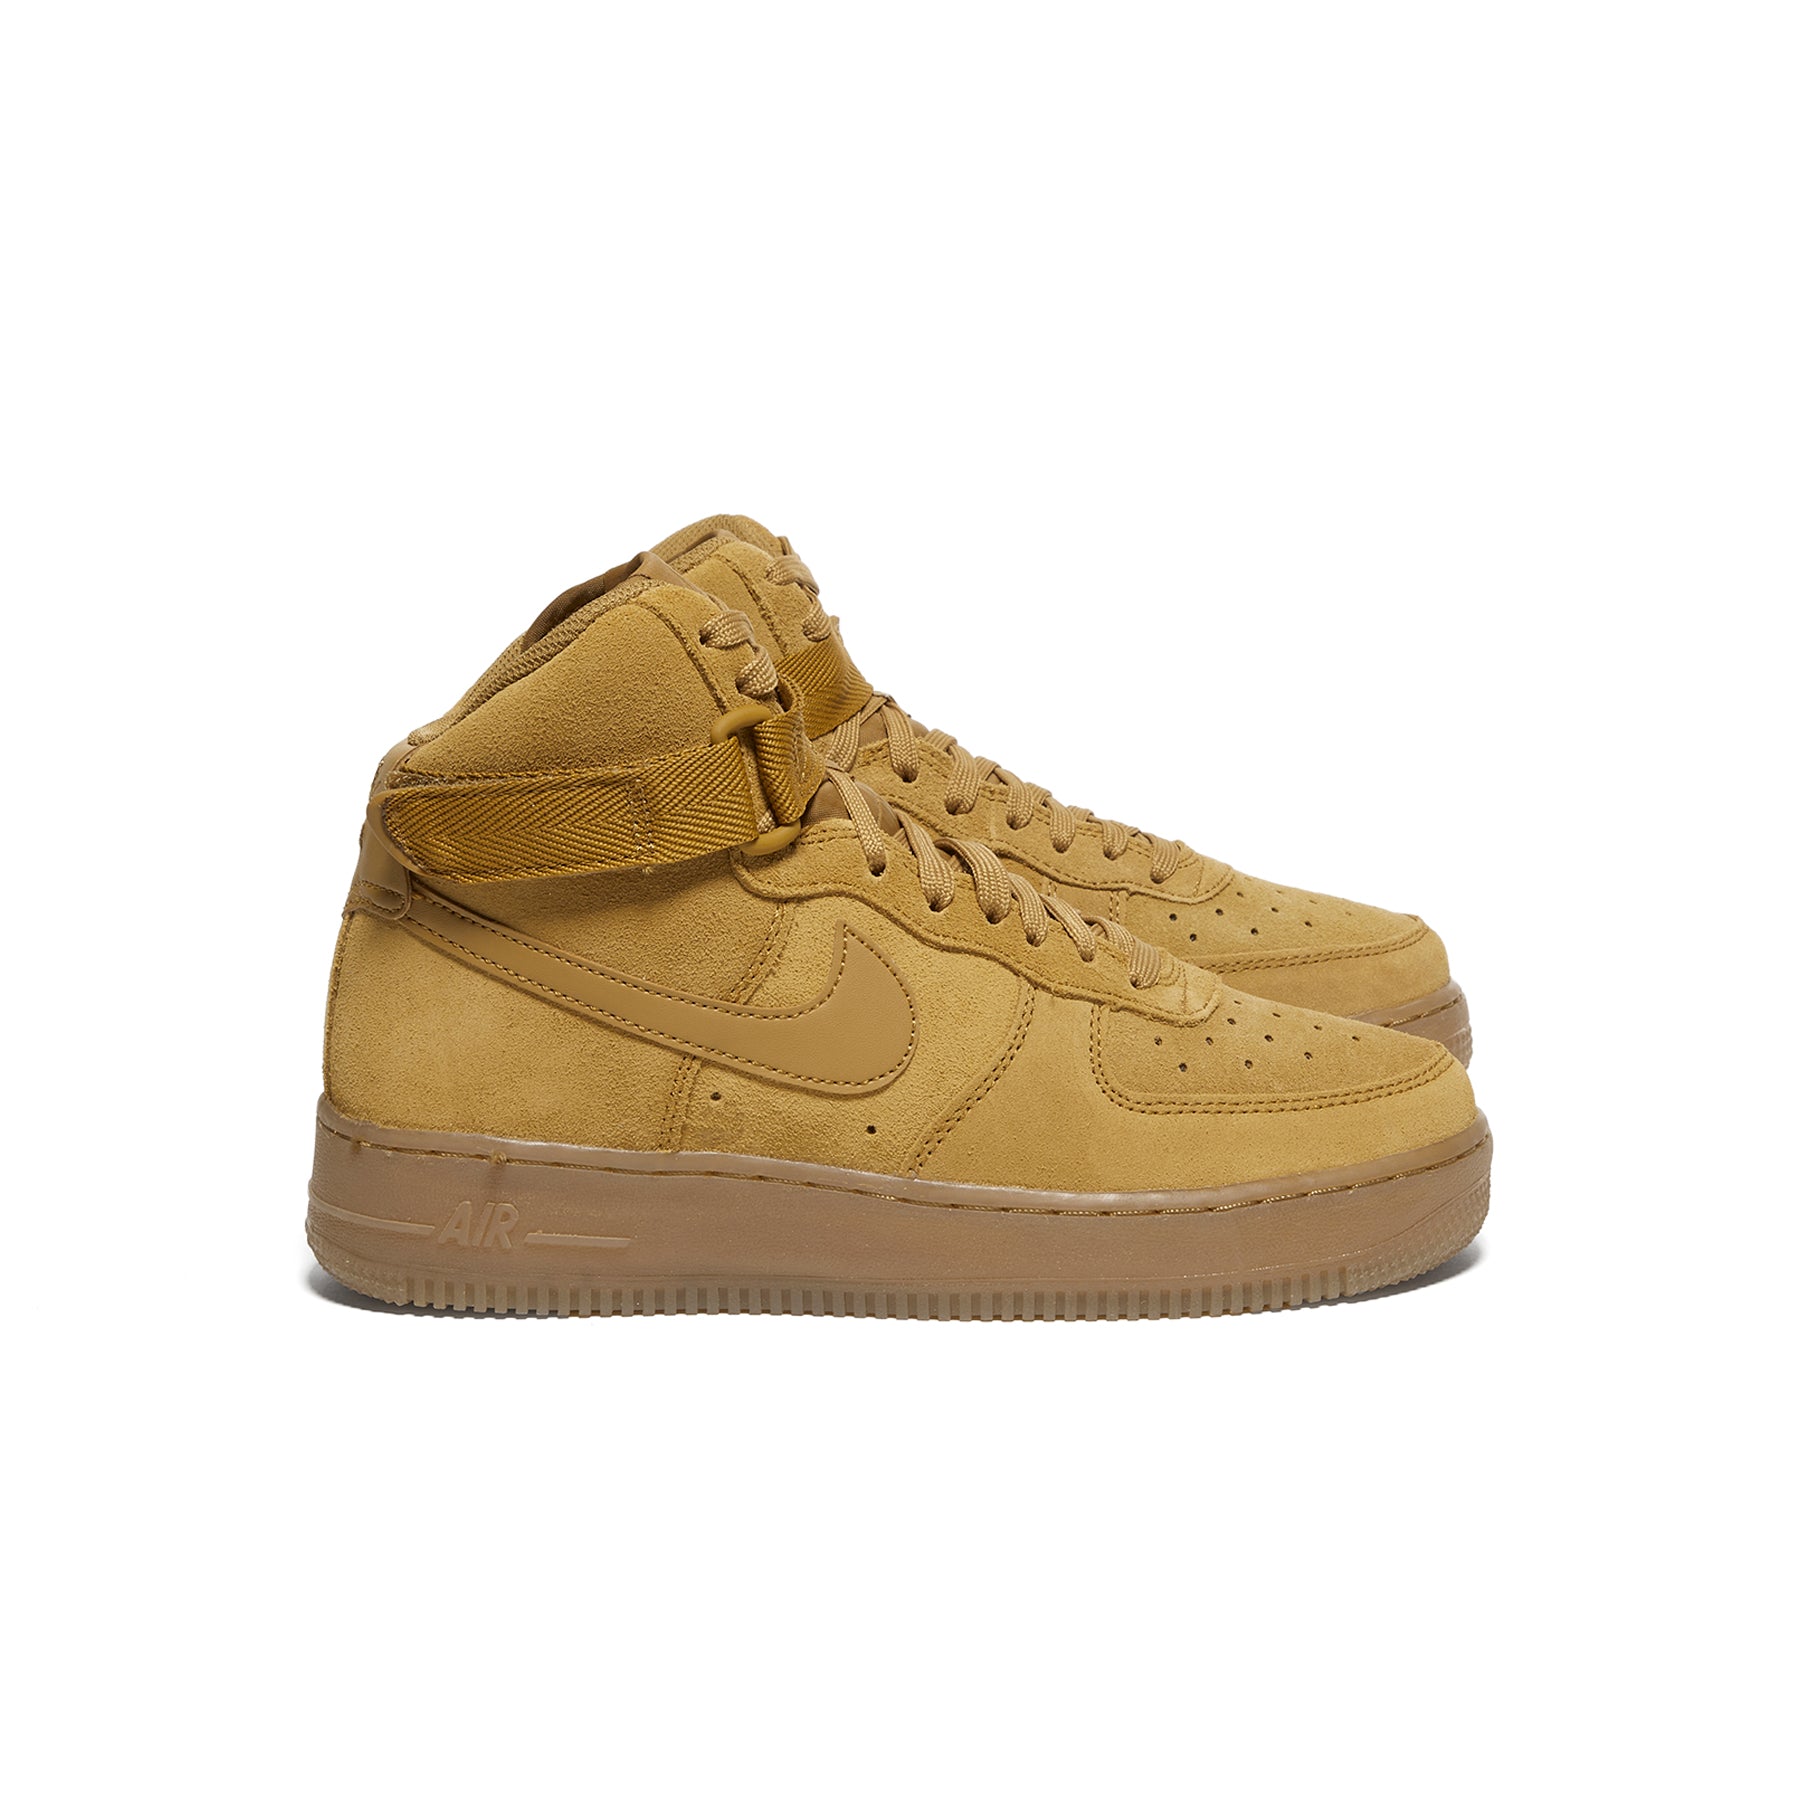 Nike Air Force 1 High LV8 3 GS Light Brown CK0262-700 Youth 3.5Y